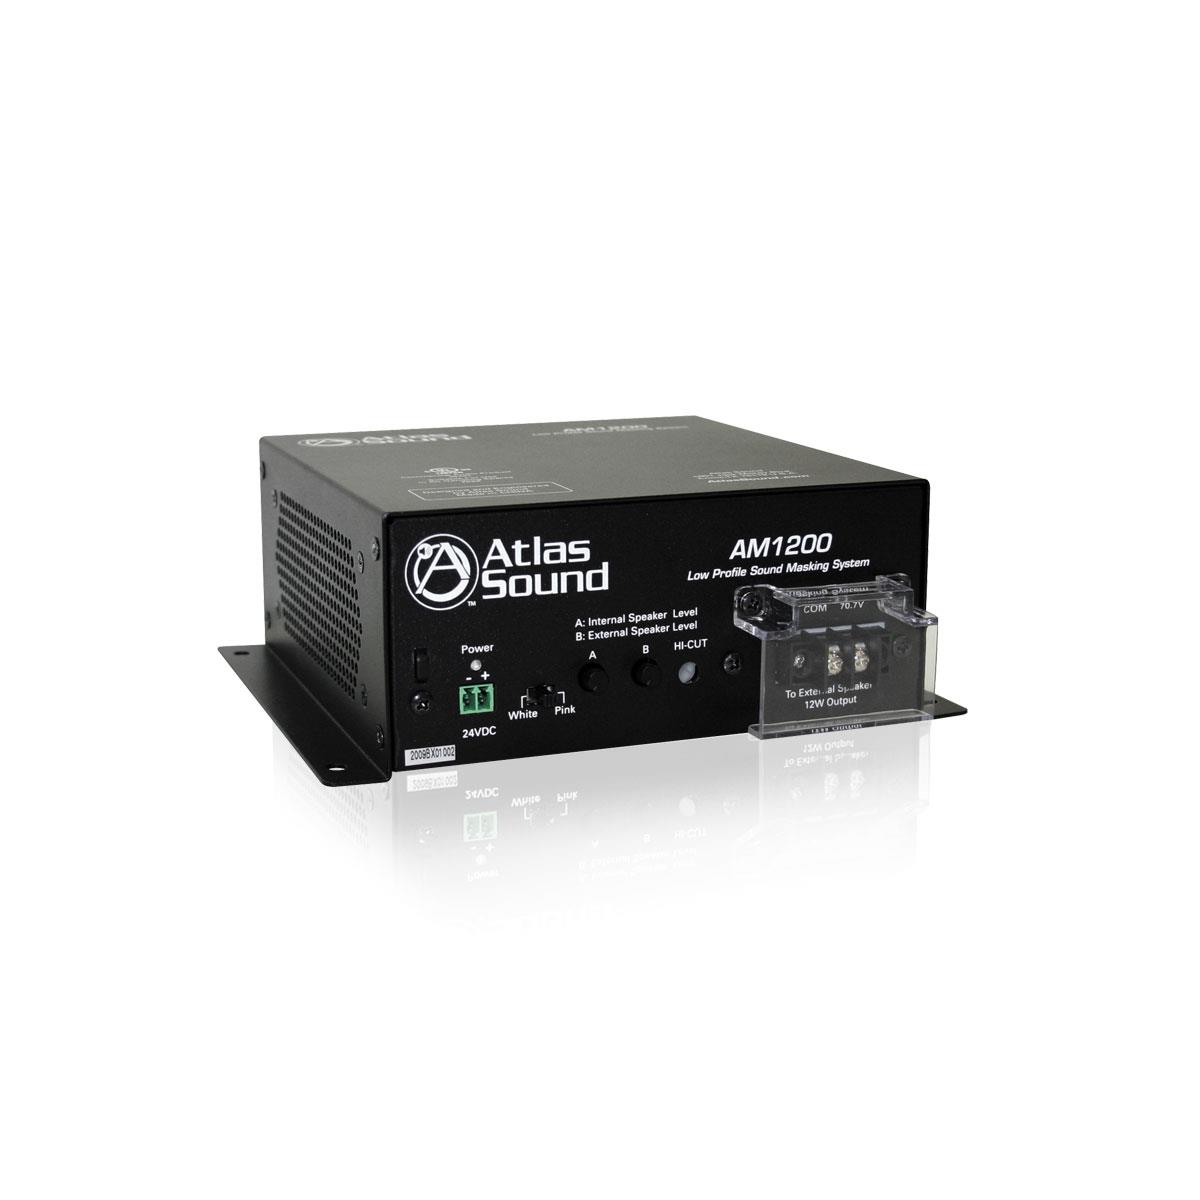 Image of Atlas Sound AM1200 Self Contained Sound Masking System UL2043